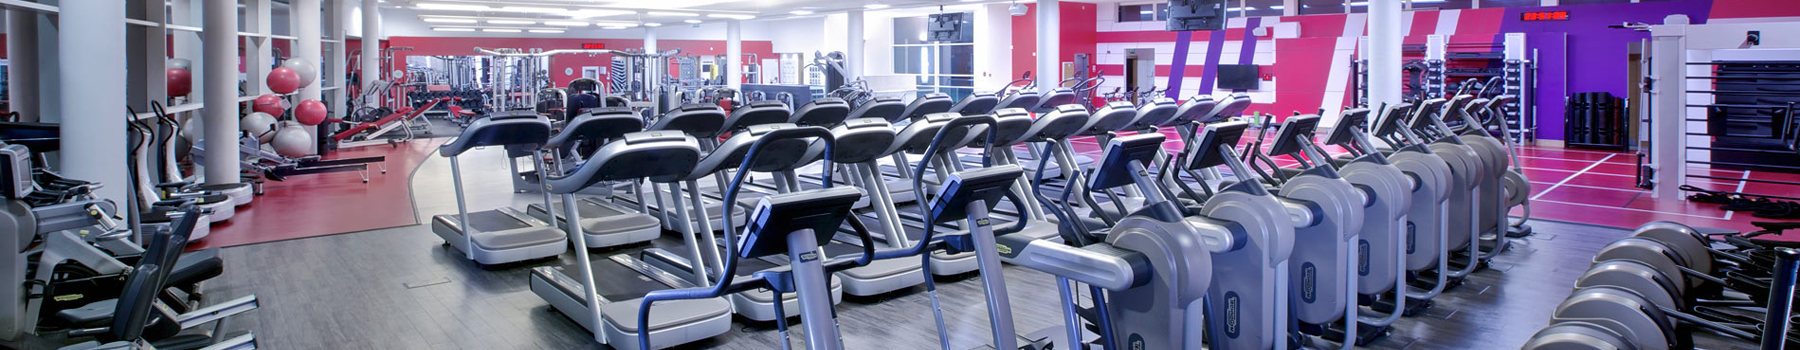 5 Free and Inexpensive Fitness Center Marketing Ideas